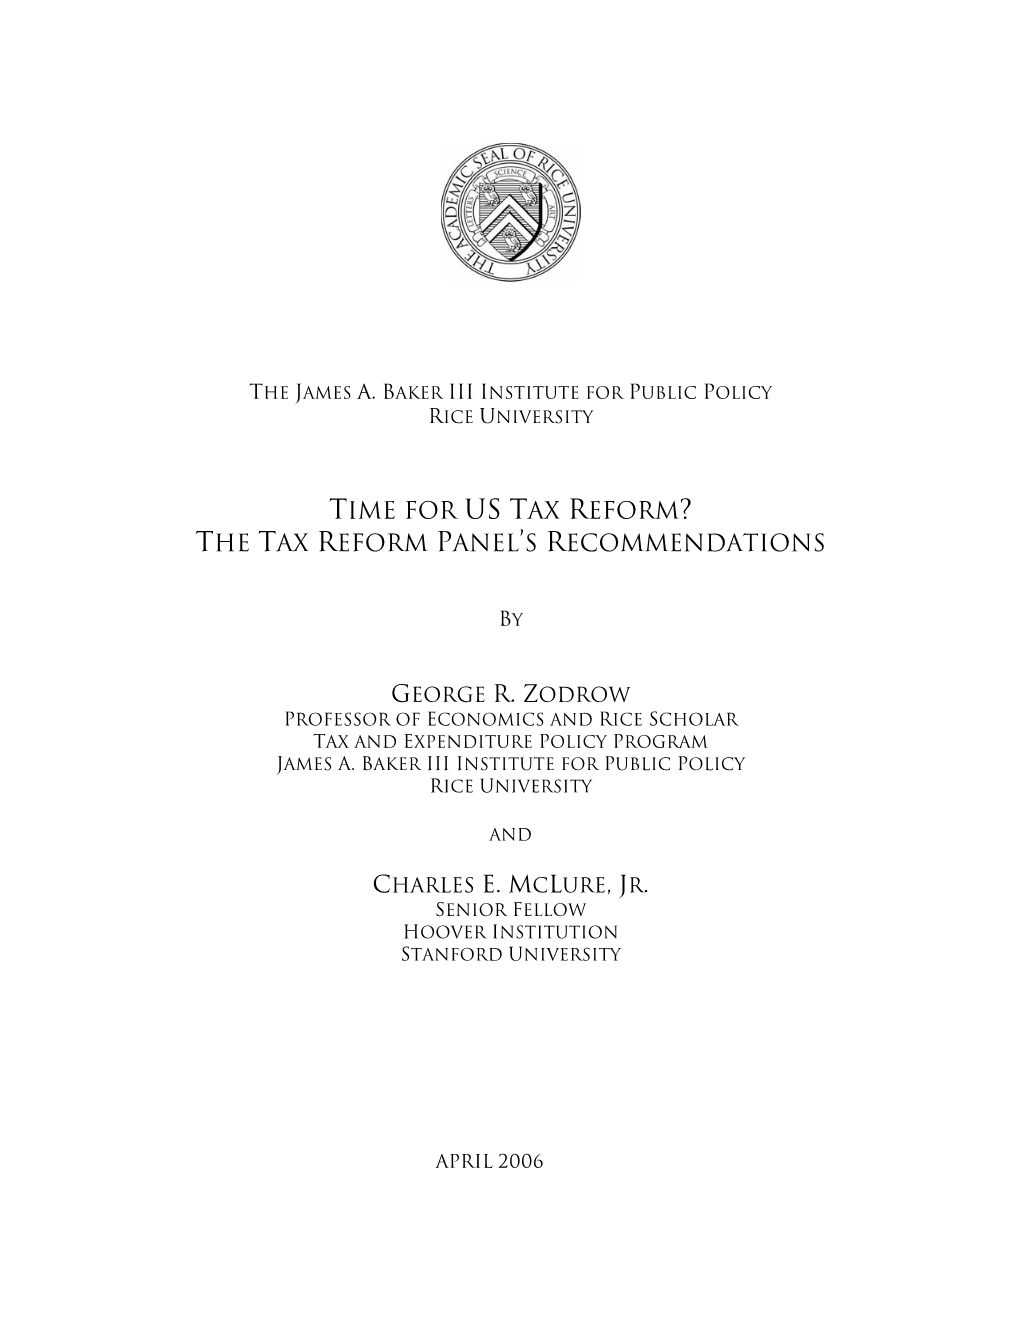 The Tax Reform Panel's Recommendations